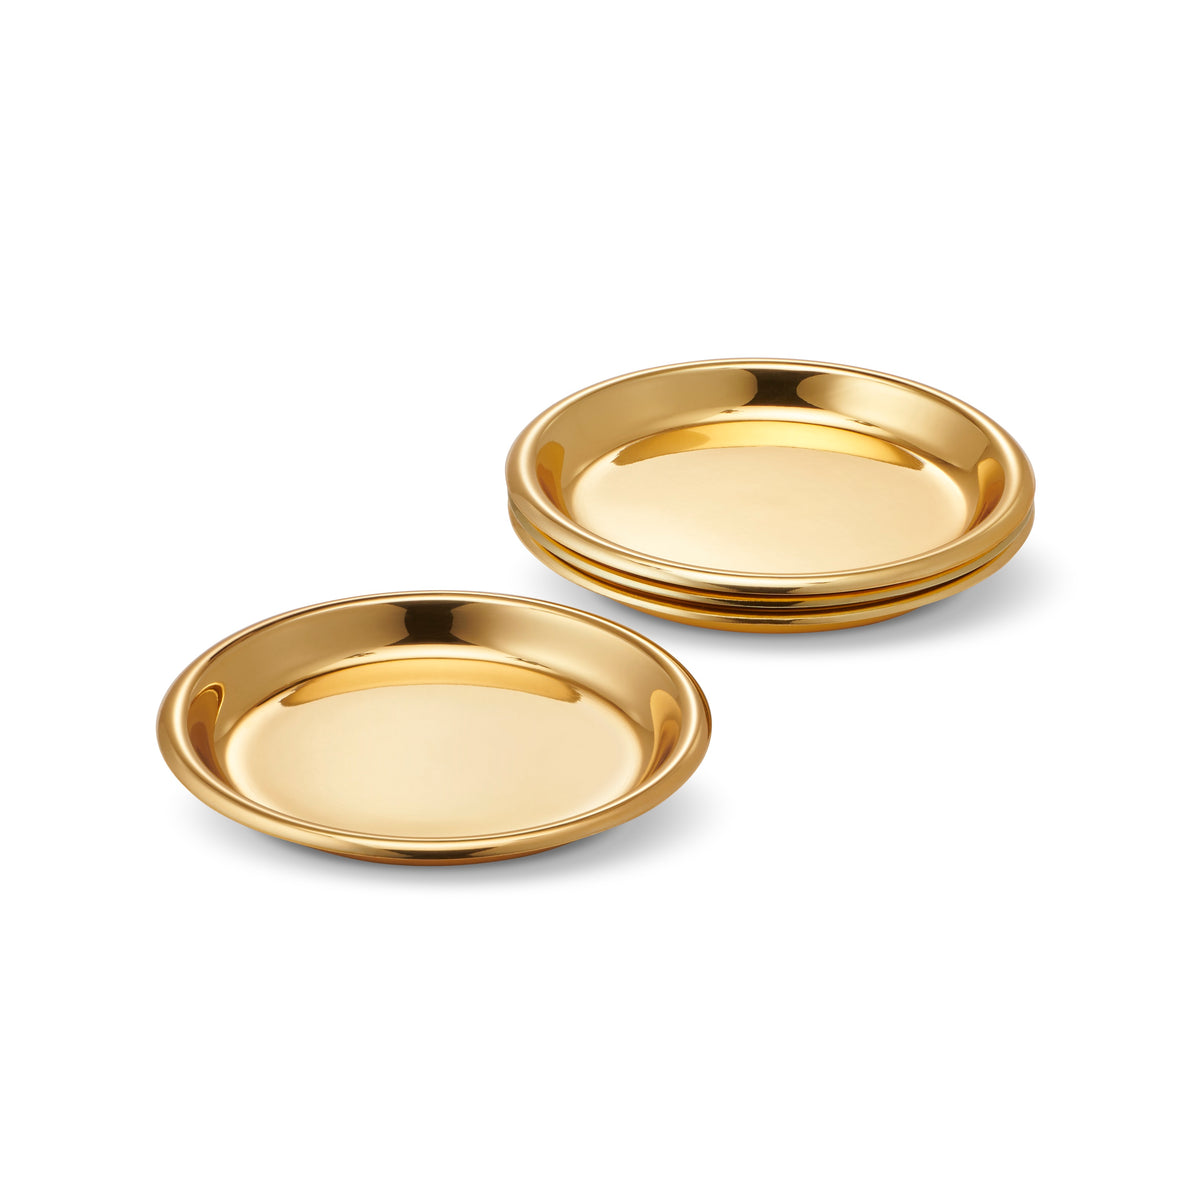 Aerin Marzia Coasters on Over The Moon